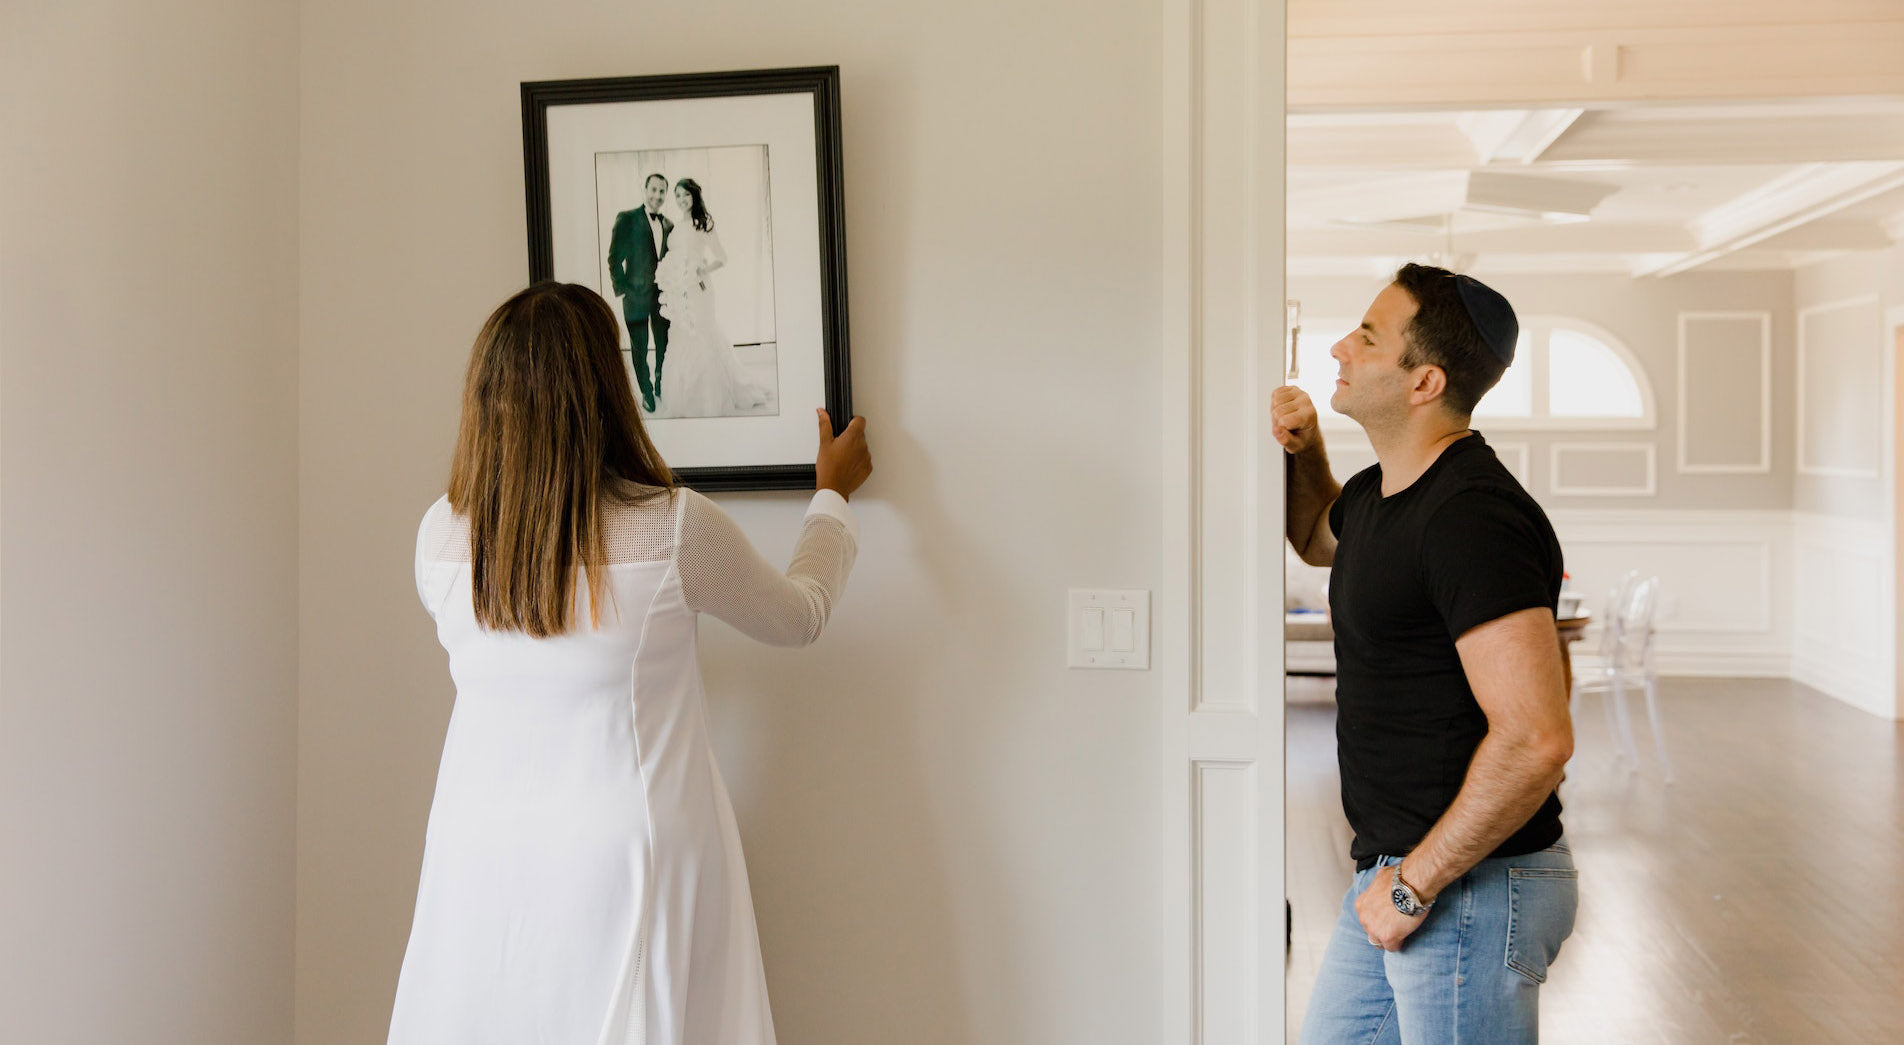 How to Hang a Picture - The Ultimate Guide